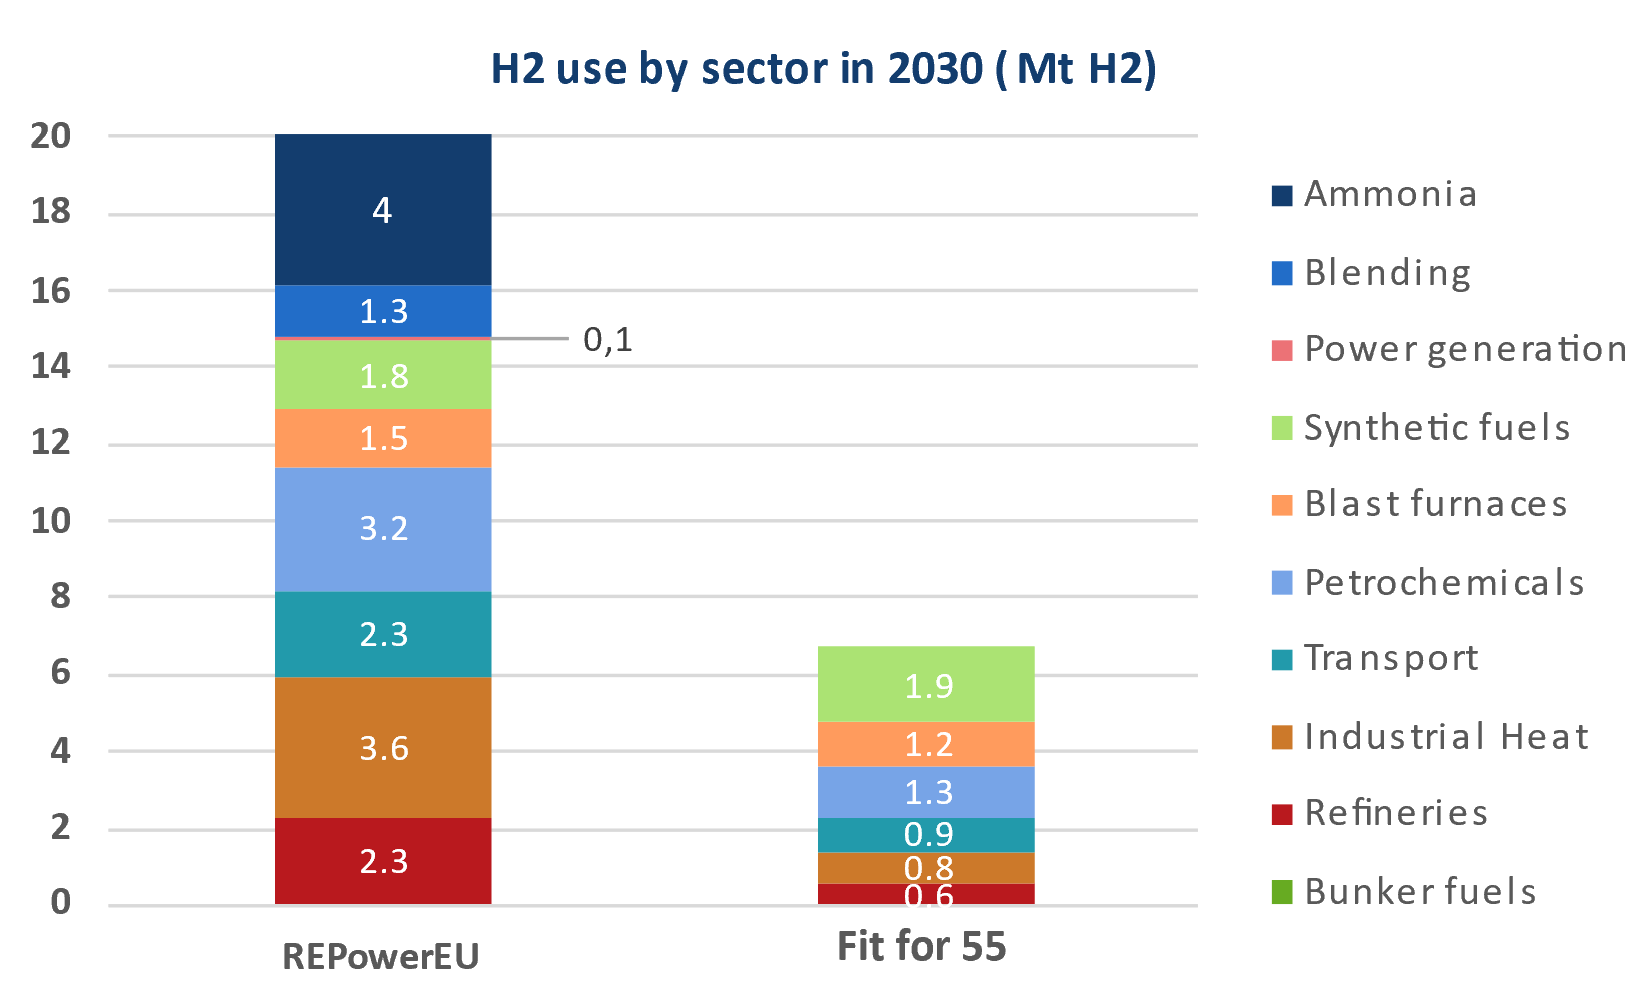 H2 use by sector in 2030